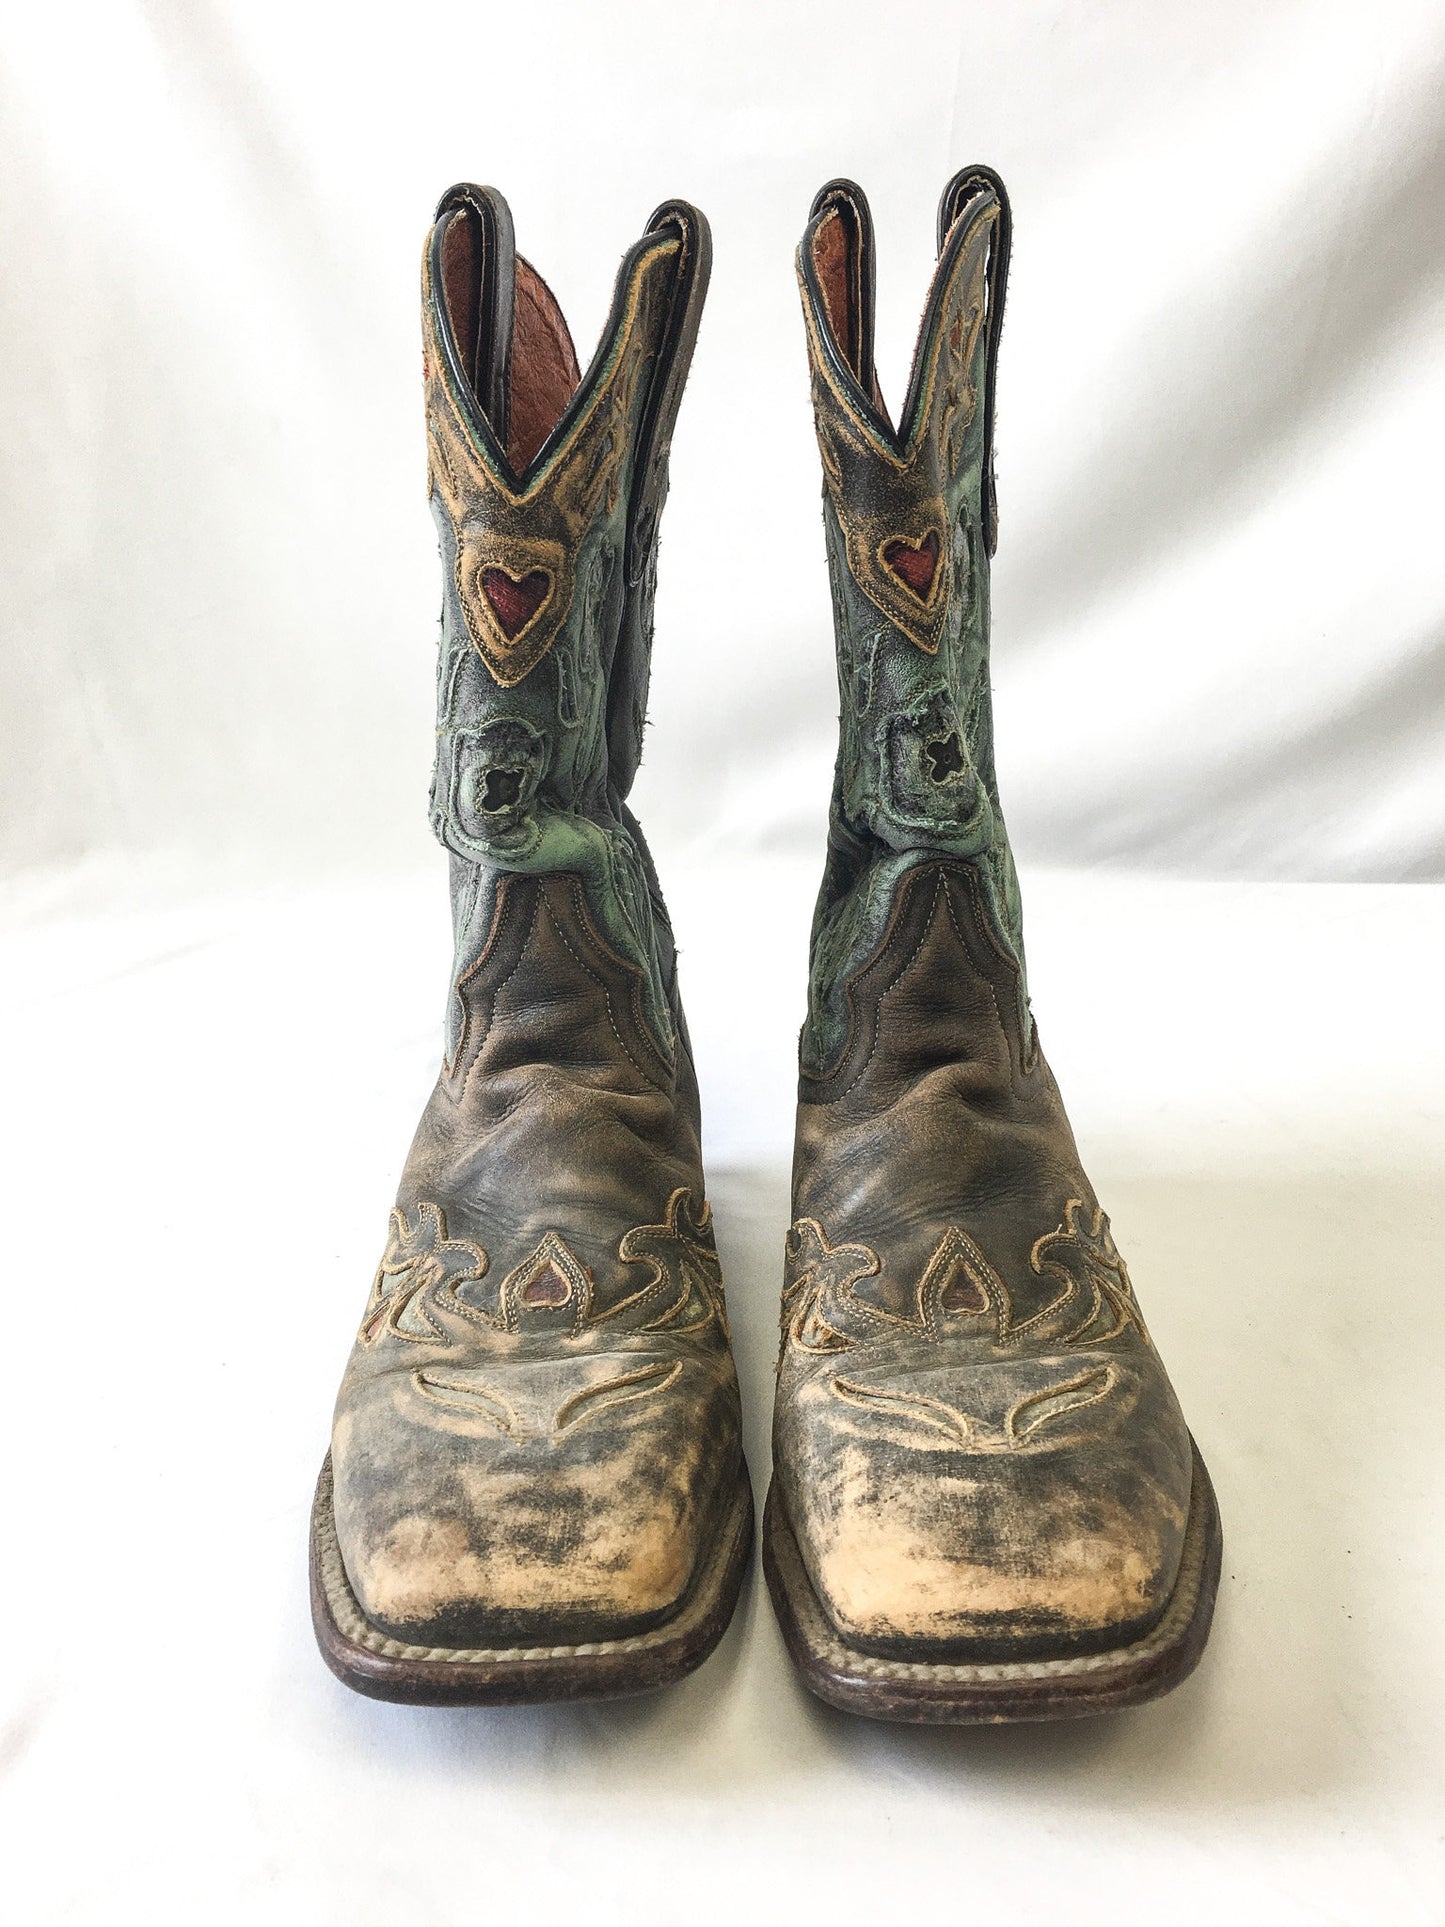 Vintage Inspired Dan Post Floral and Heart Detailed Cowboy Boots, Style #2914, Women's Sz. 9